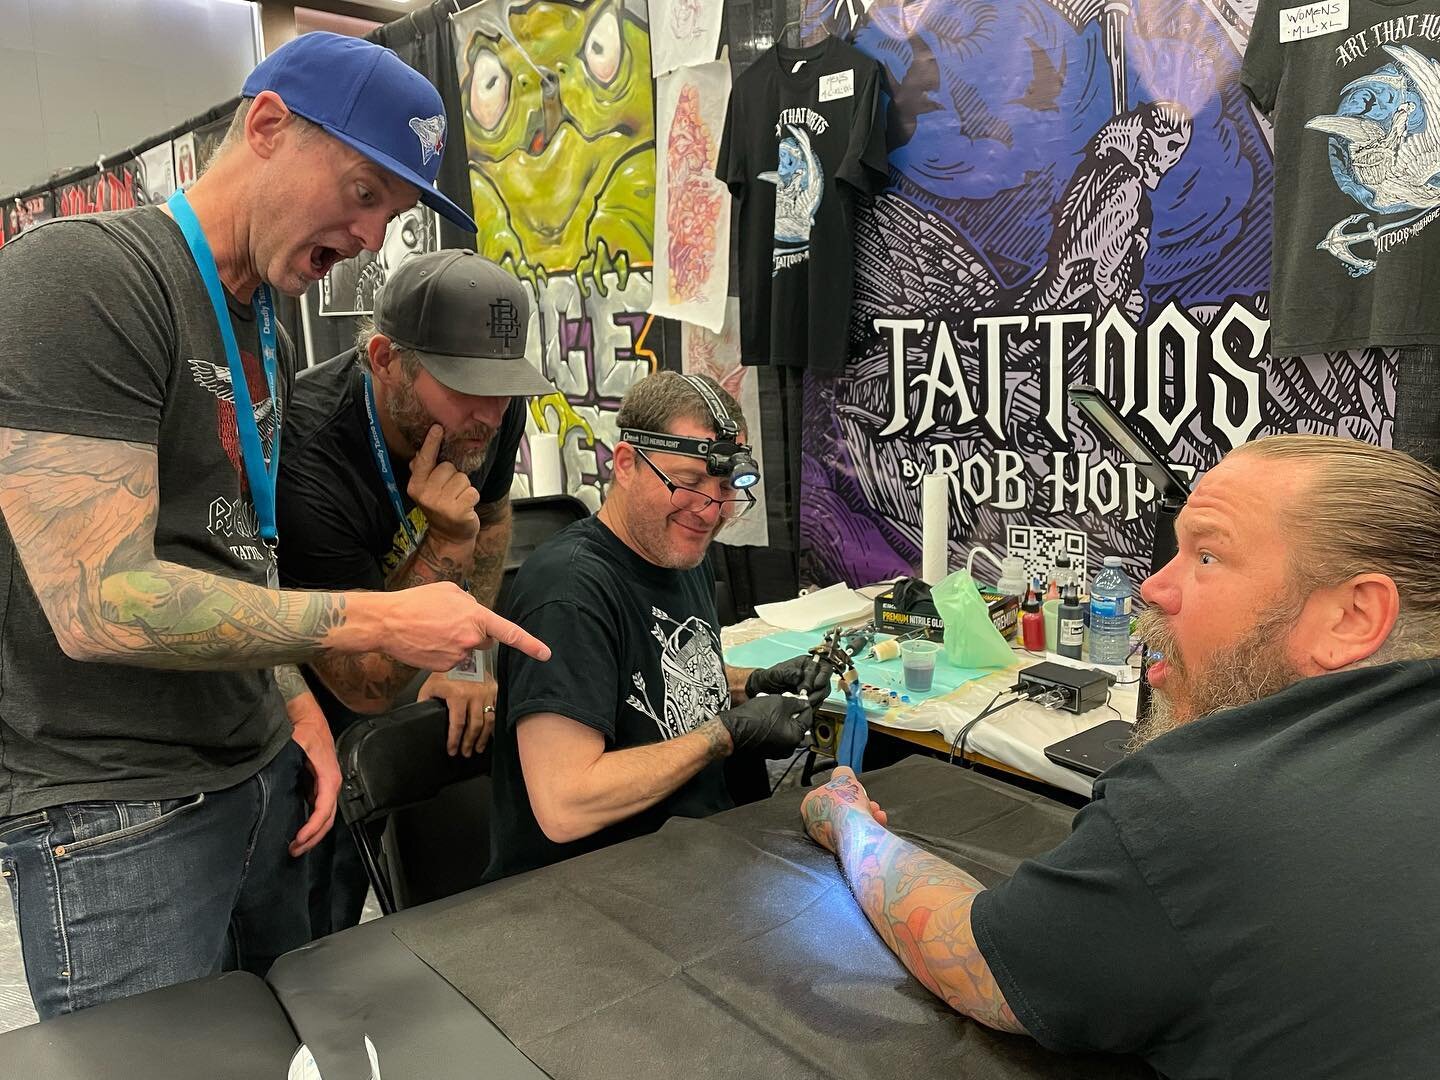 Tattooed the worlds funniest MC @rich_handford at the deadliest convention! Thanks to the @jamestex family and crew who set up and and took down a great show👍👍👍